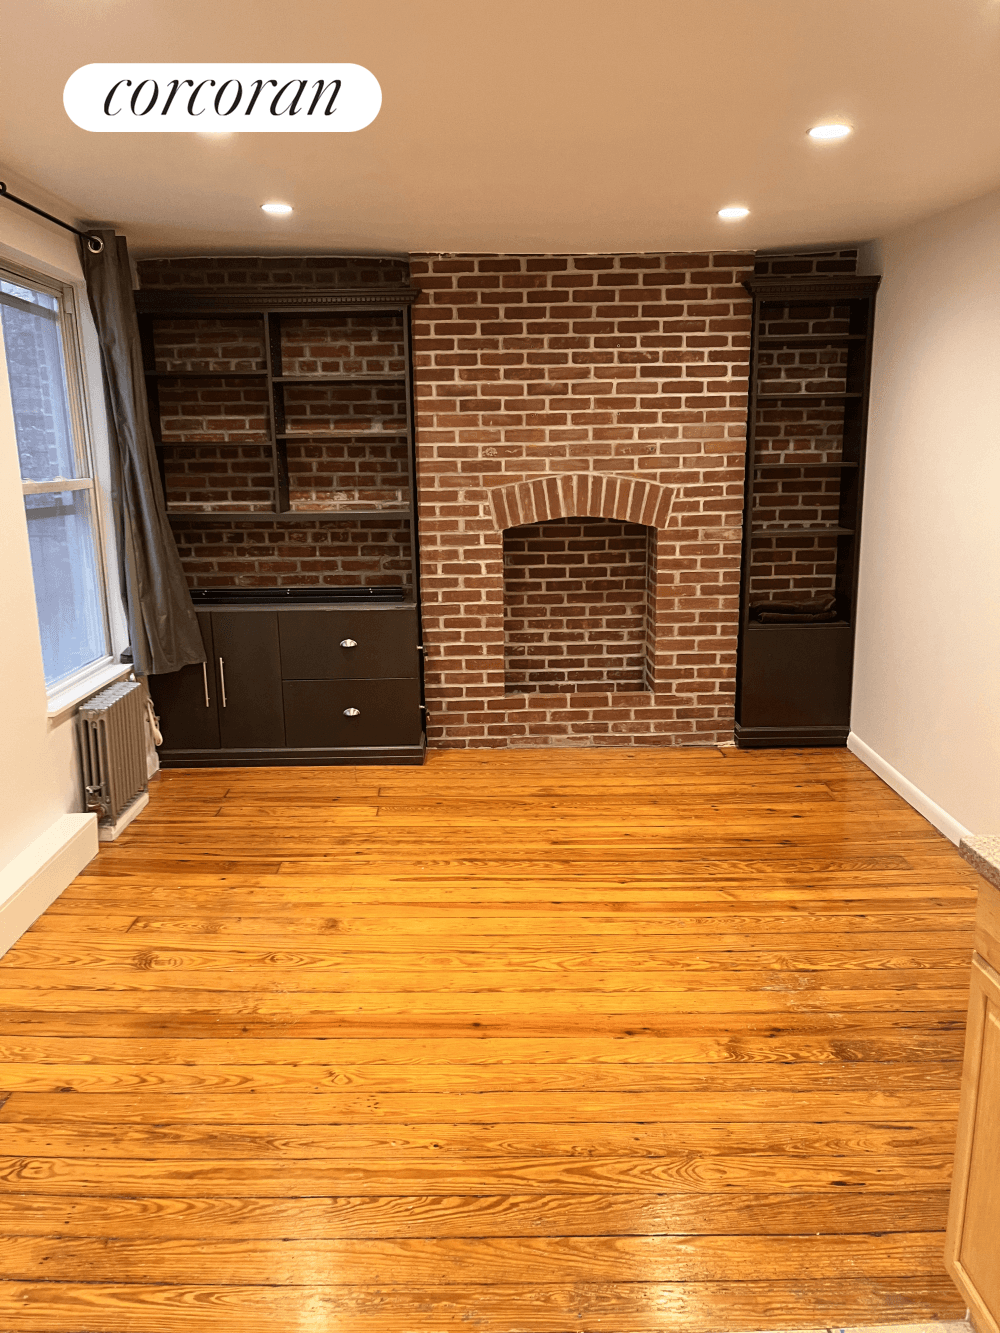 One Bedroom Coop in a Charming Carriage House.